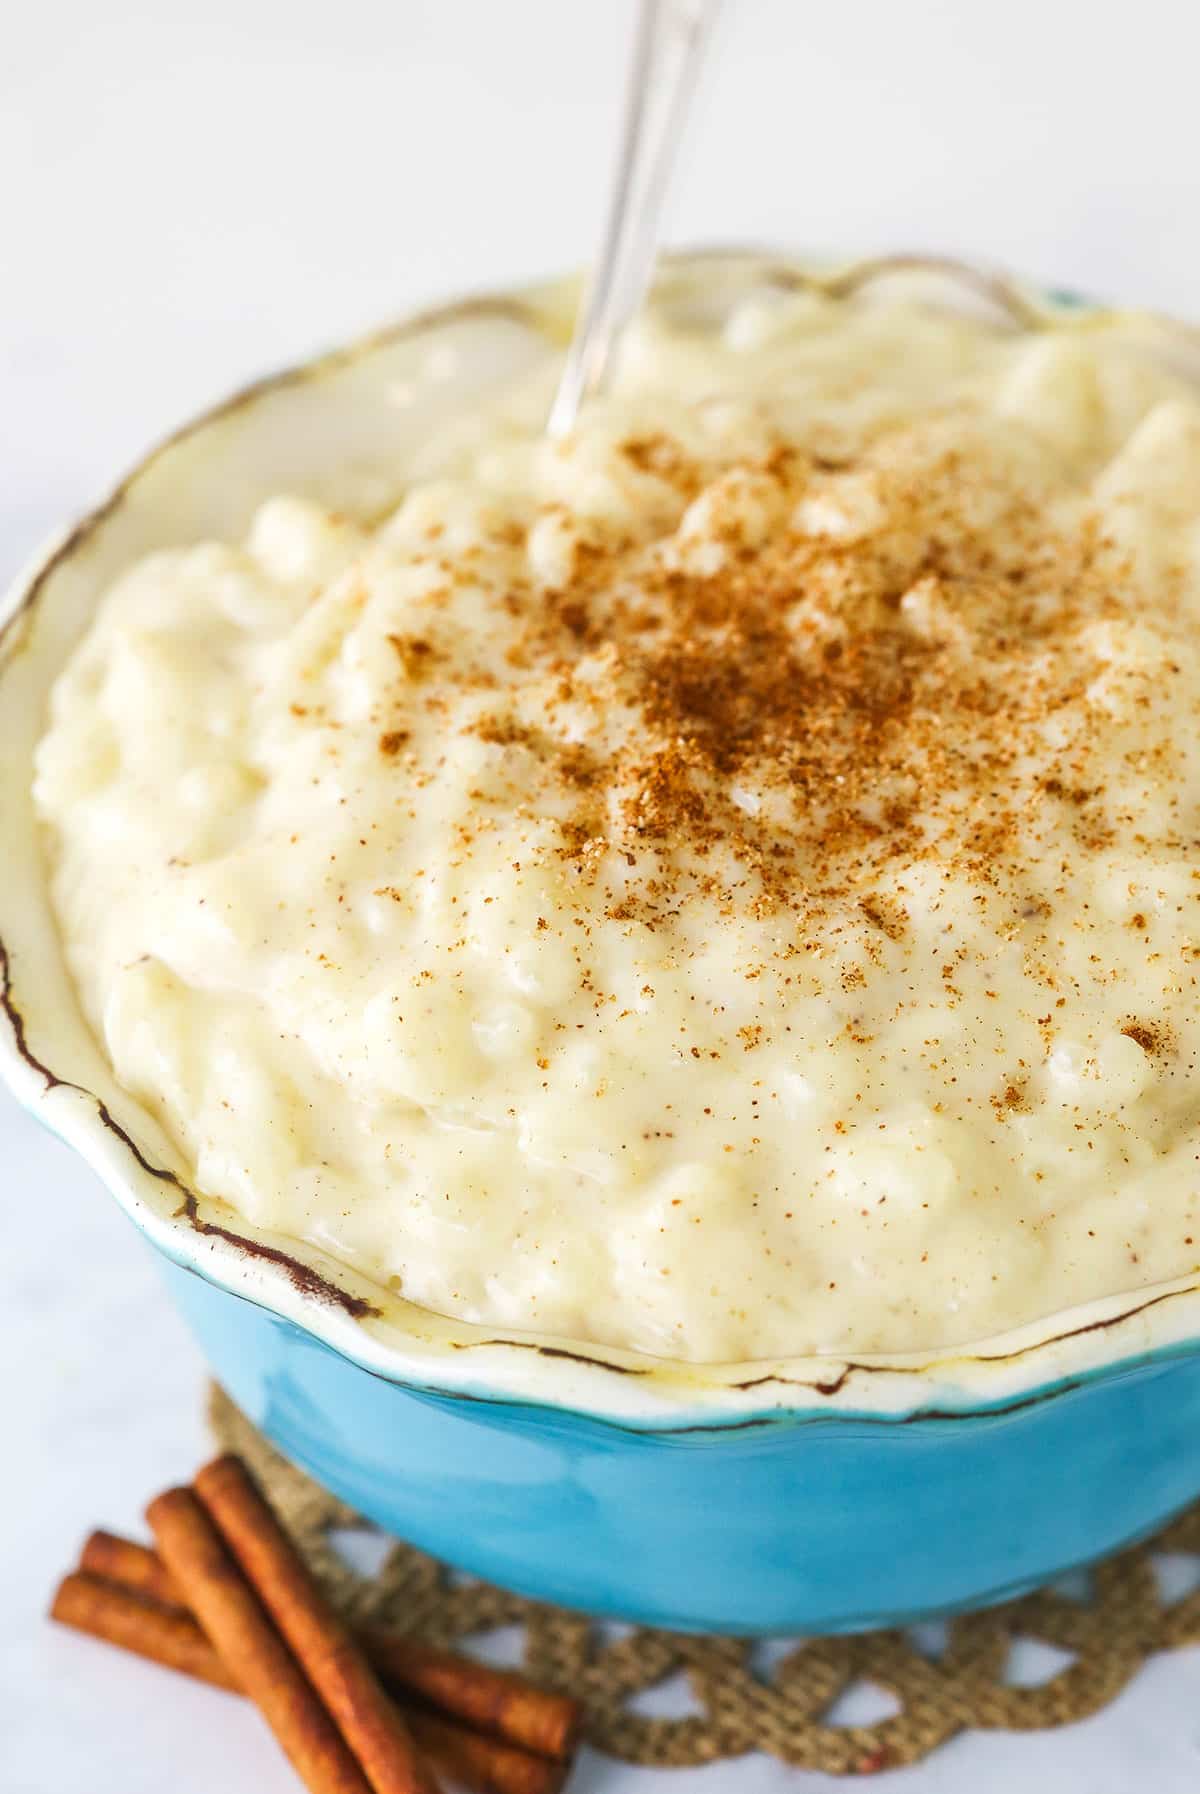 A Teal Bowl full of Creamy Rice Pudding Topped with Ground Cinnamon.